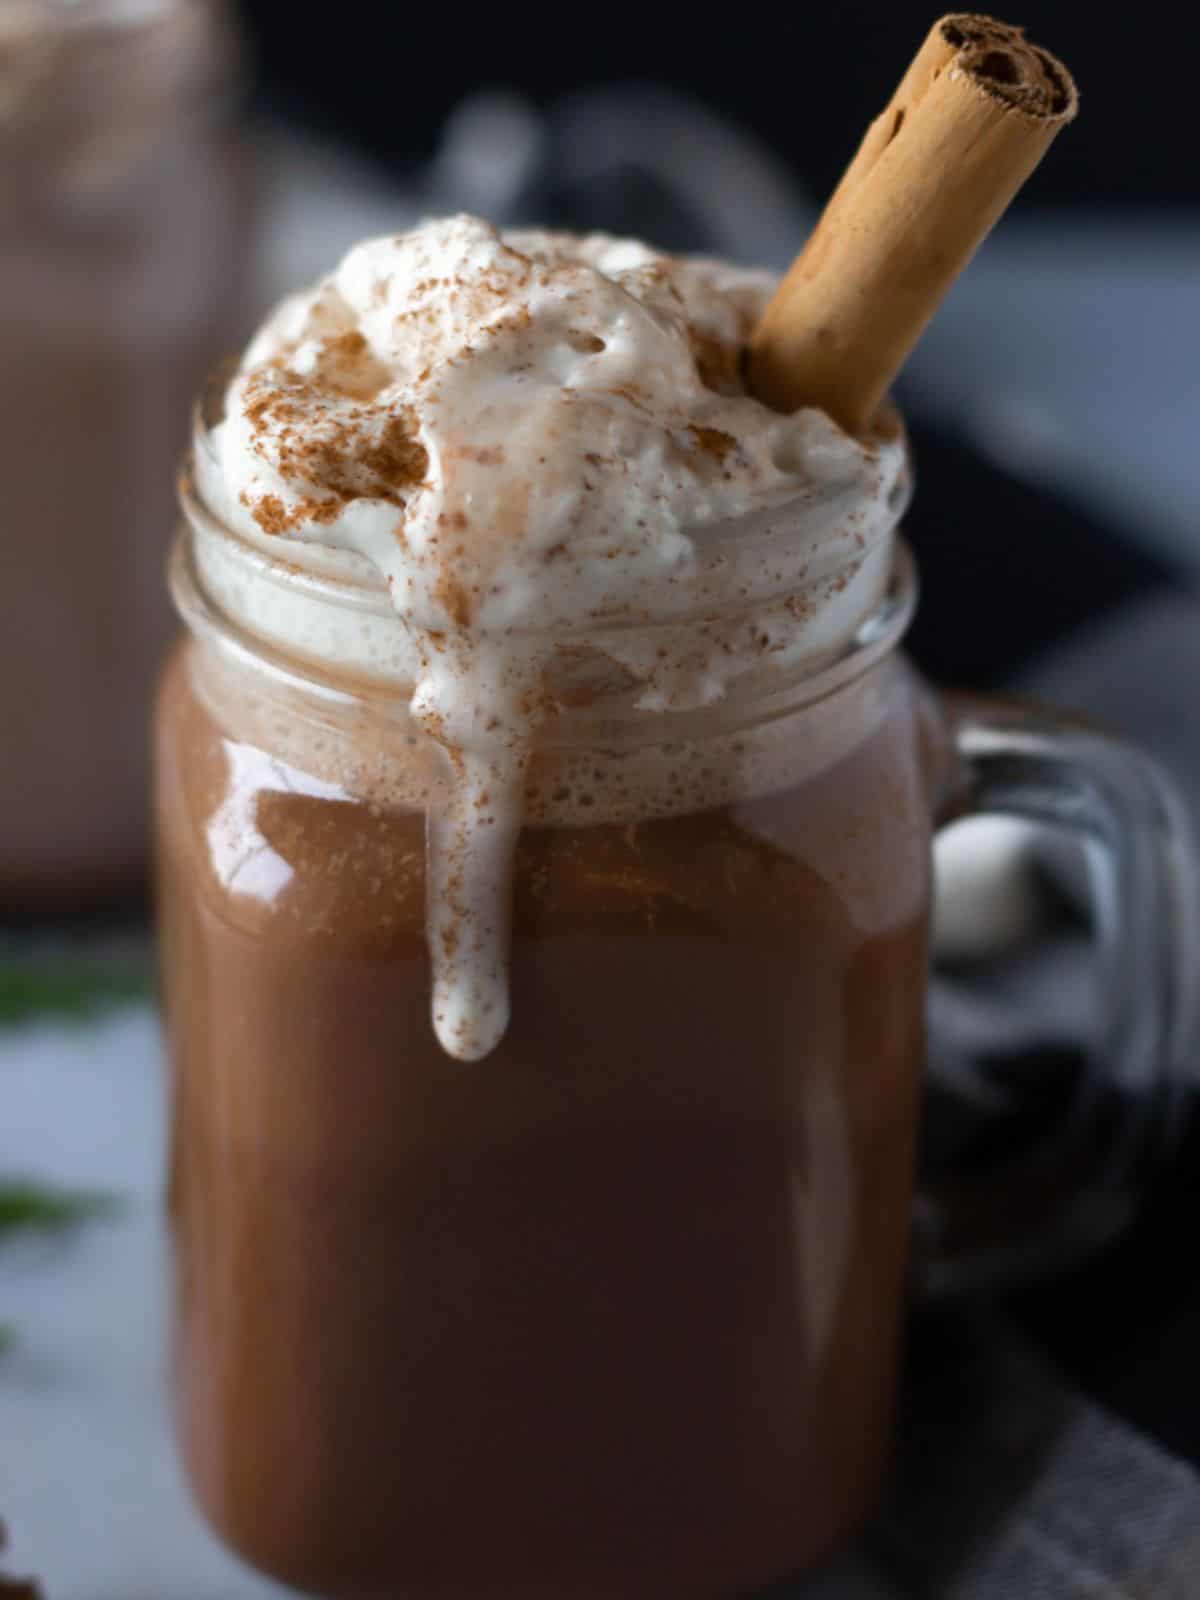 Glass mug filled with hot chocolate, topped with whipped cream and a cinnamon stick.